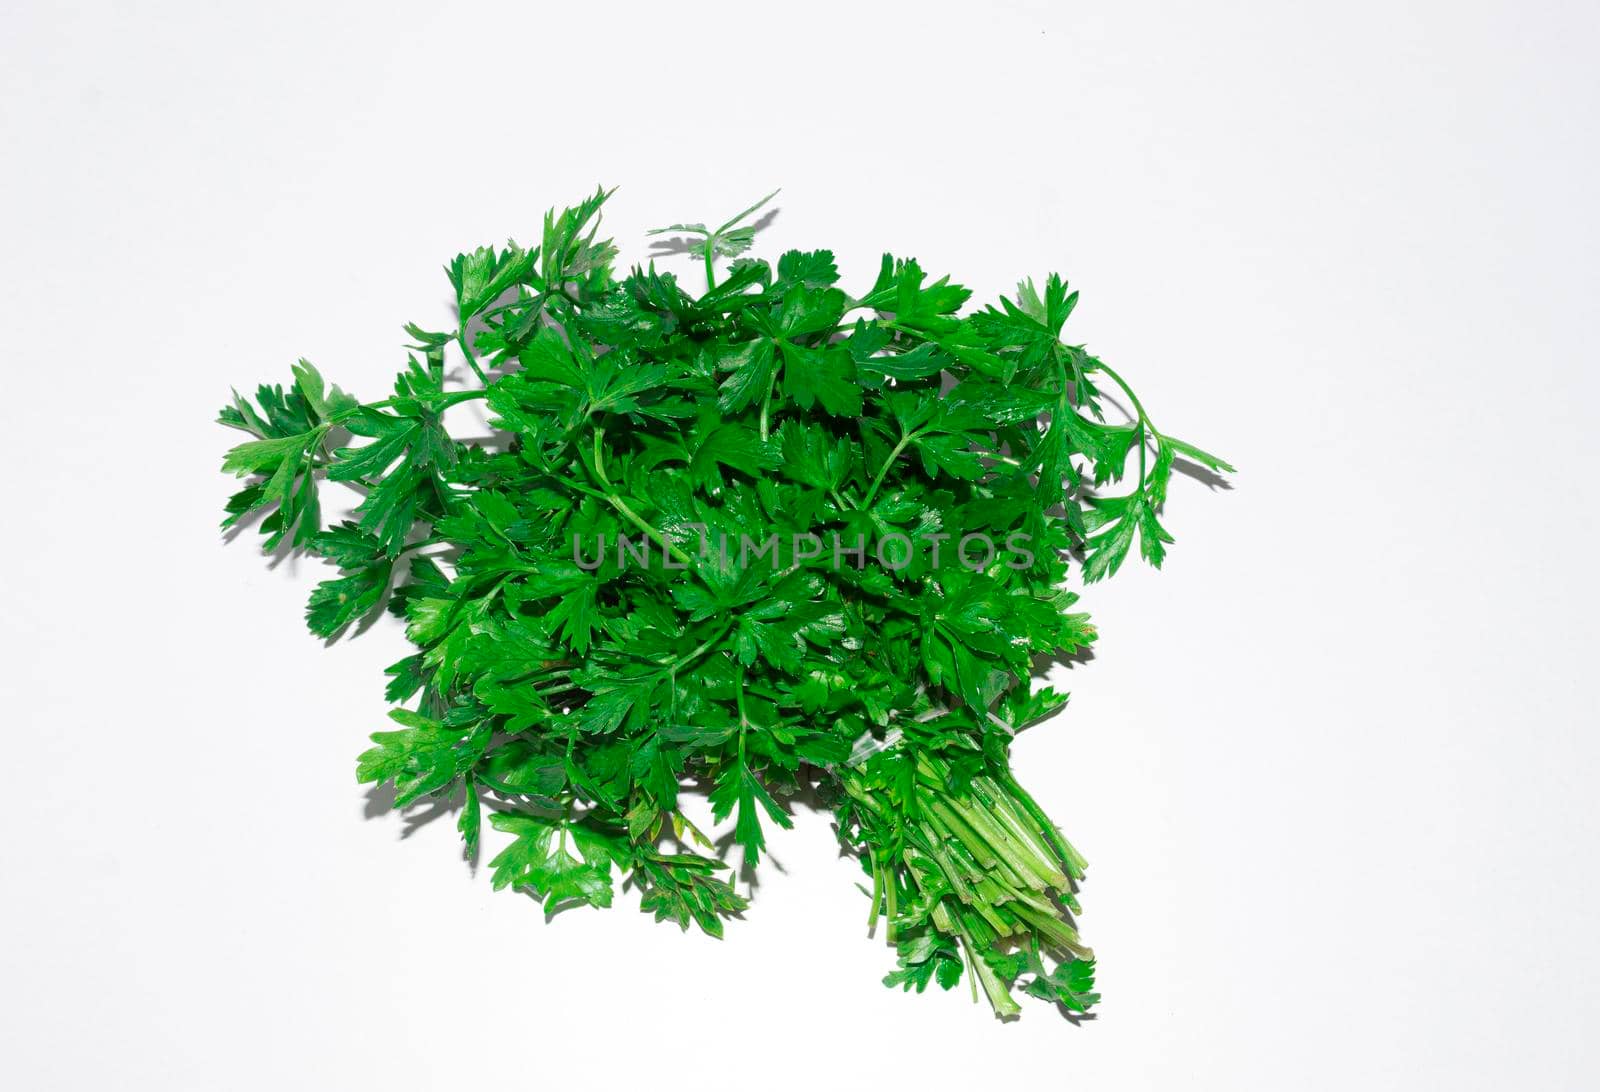 A bunch of parsley picked from the garden